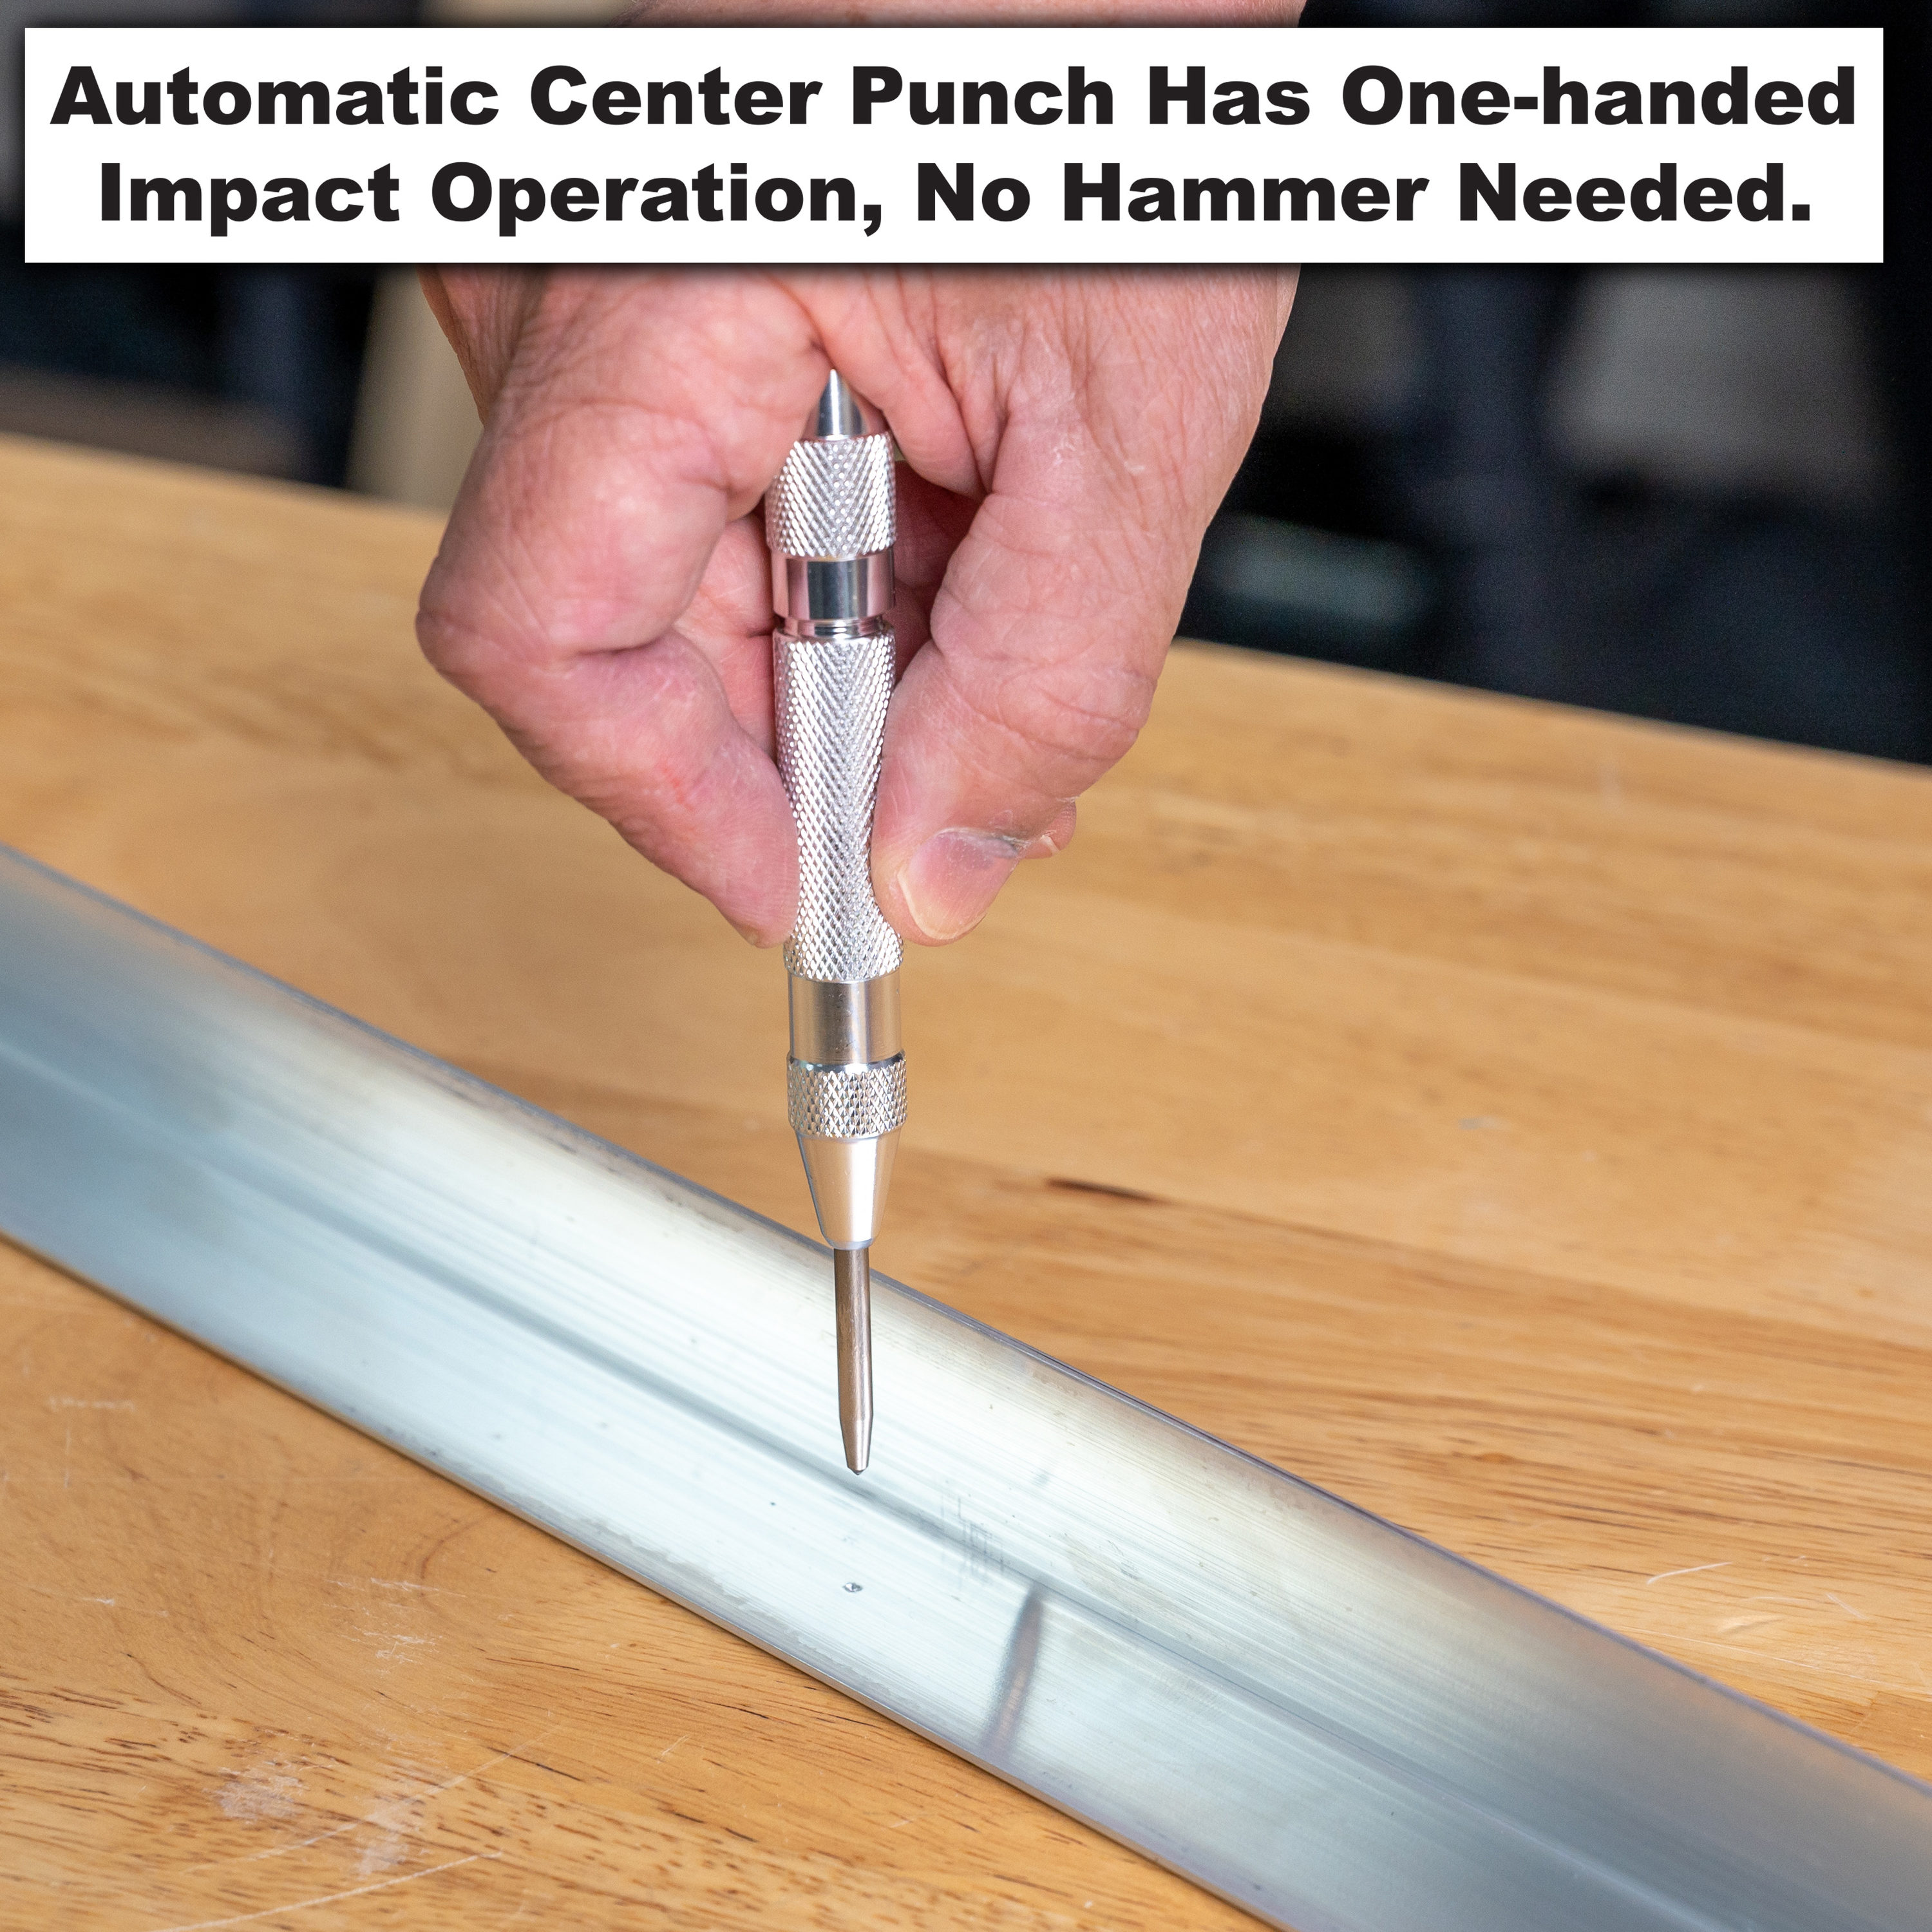 How does an Automatic Center Punch work? – ALLY Tools and Parts